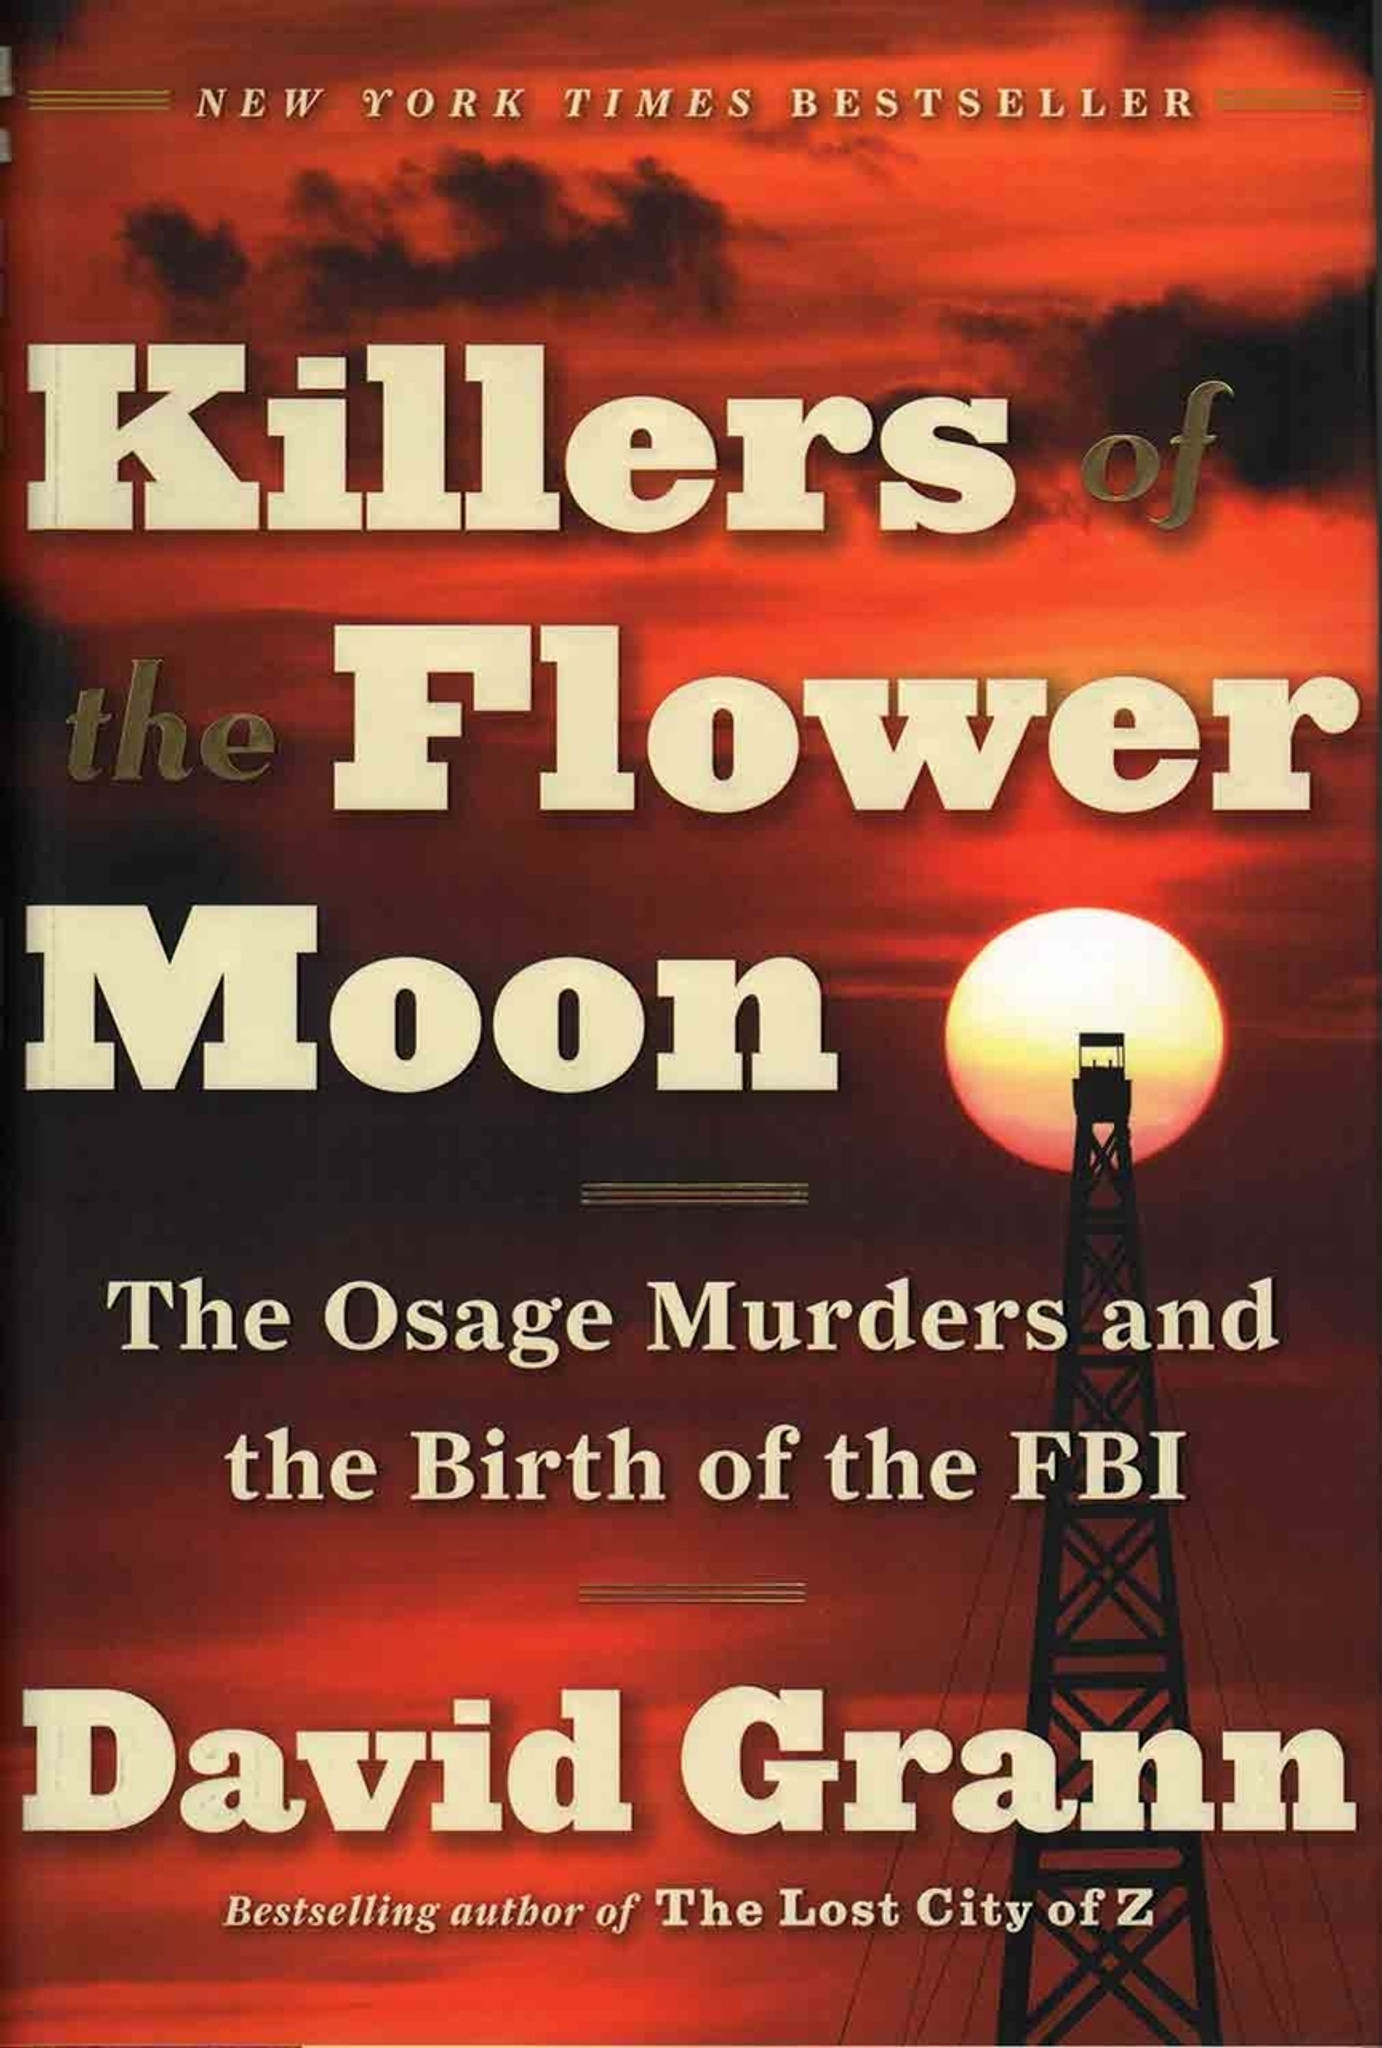 The Killers of the Flower Moon: The Osage Murders and the Birth of the FBI